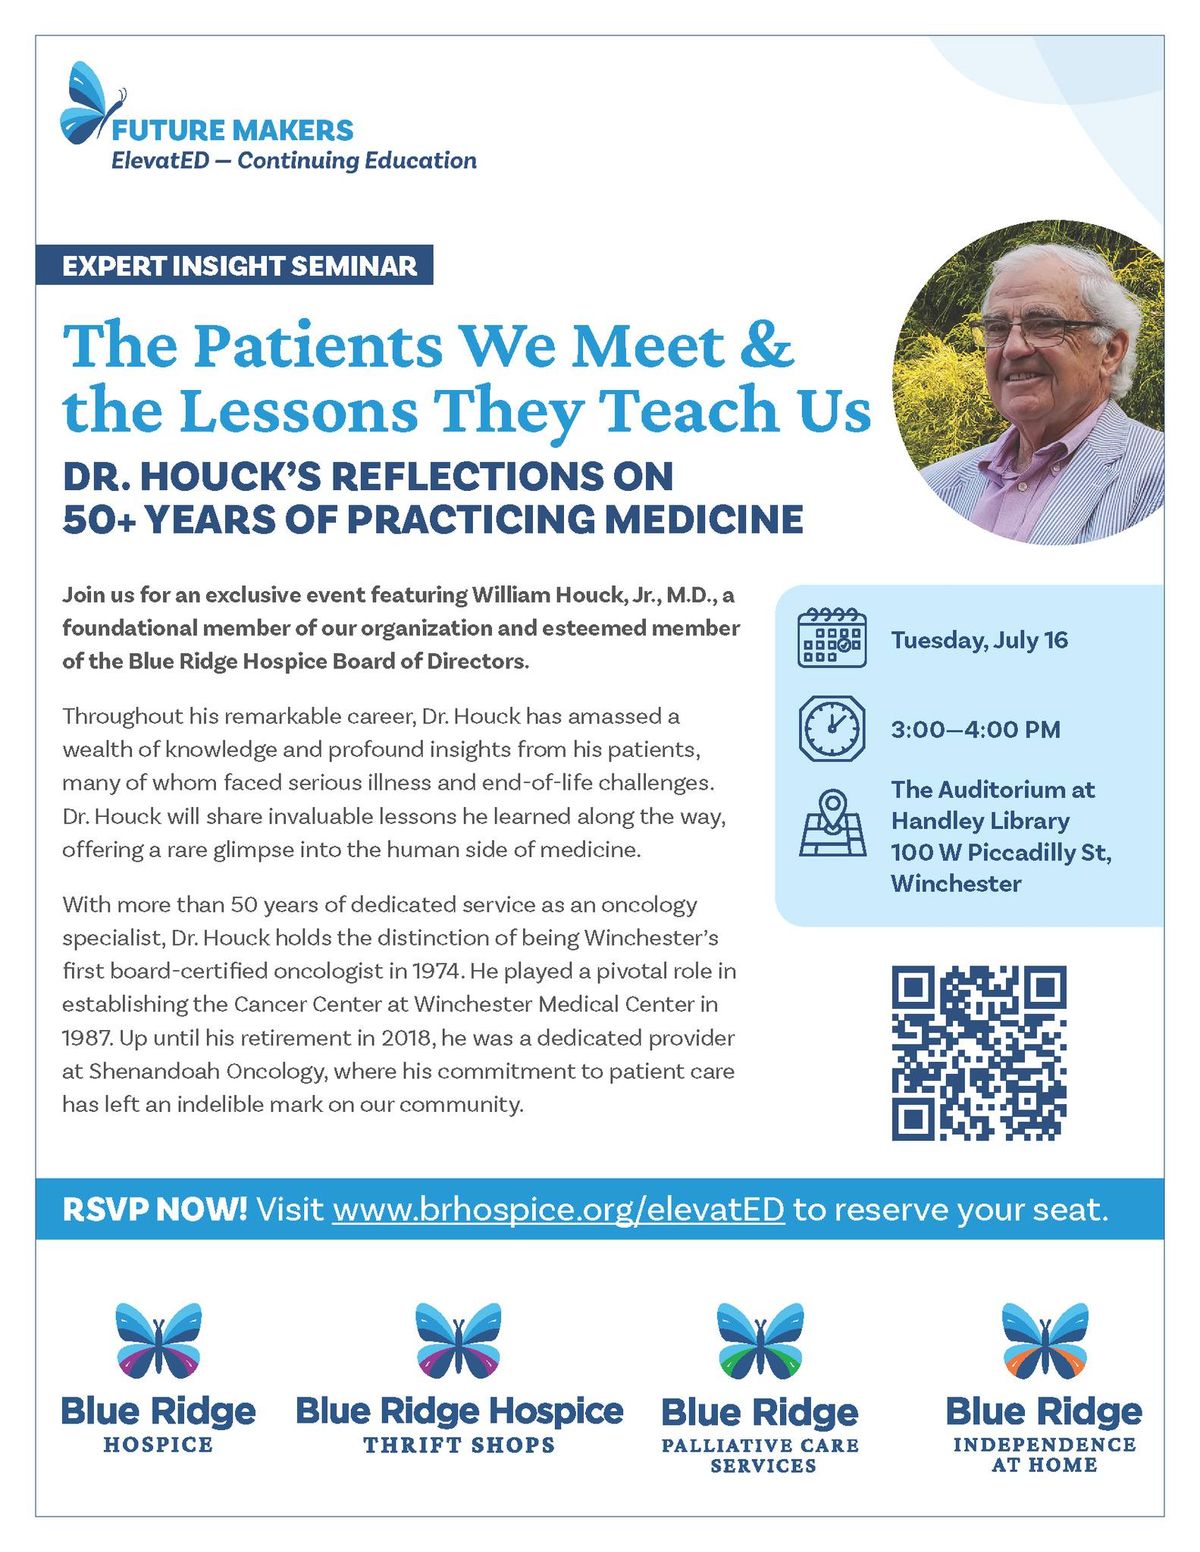 The Patients We Meet & the Lessons They Teach Us